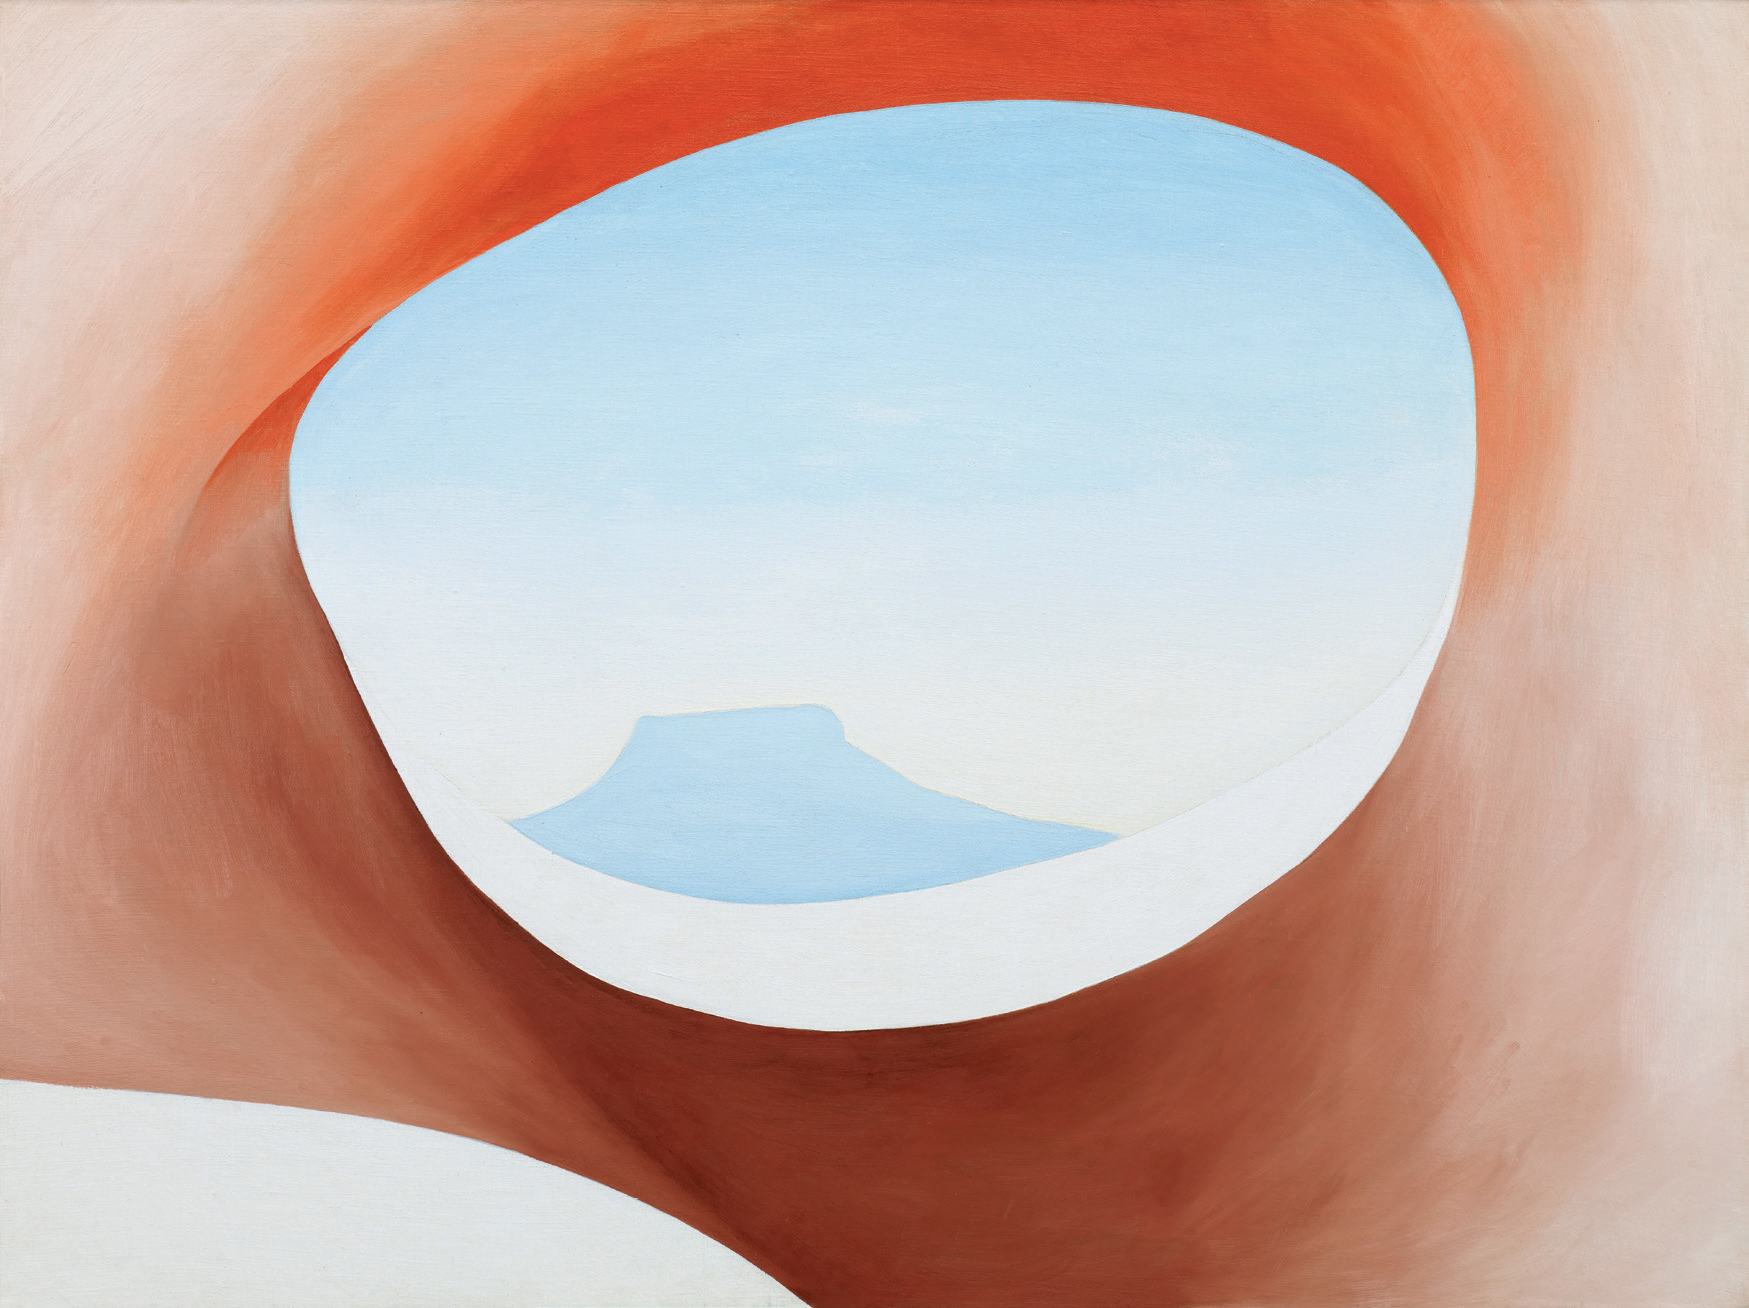 Pedernal – From the Ranch # 1, (1956) by Georgia O'Keeffe